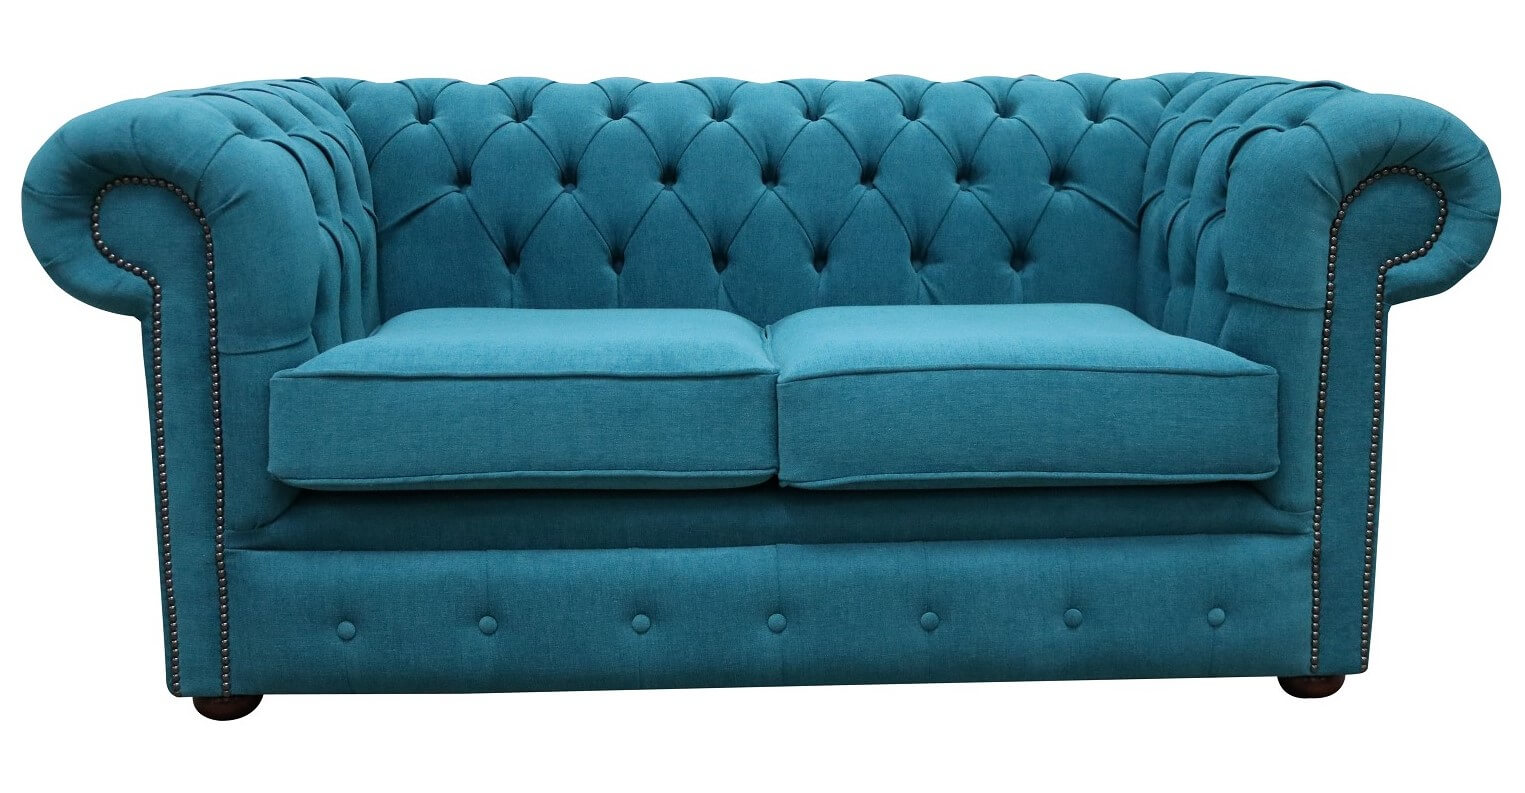 Timeless Tradition Meets Modern Flair The Chesterfield Sofa in Contemporary Living Rooms  %Post Title